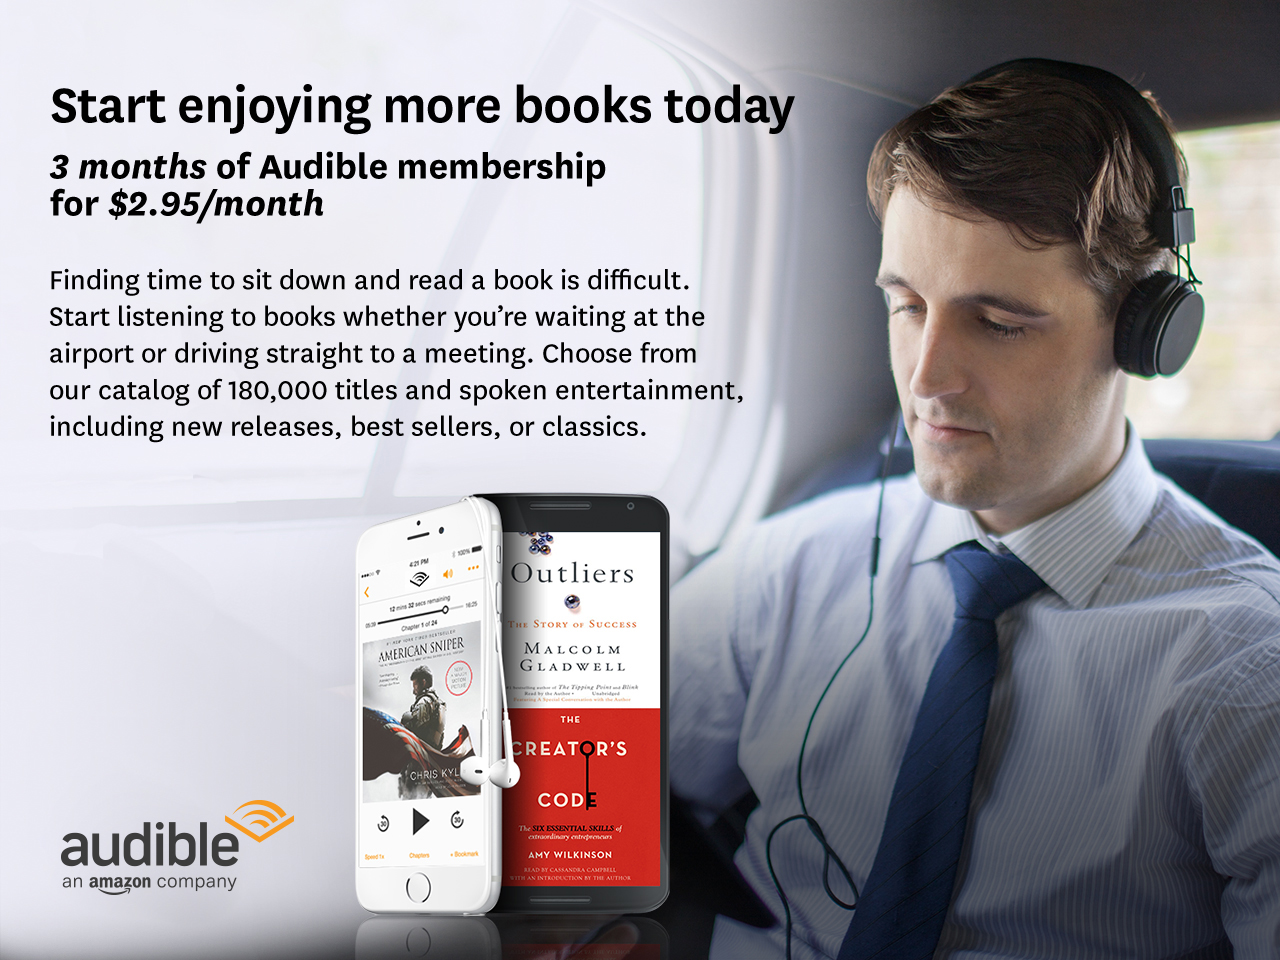 amazon Download Audible for PC or Laptop for Windows 7_8_8.1_10_XP and Mac